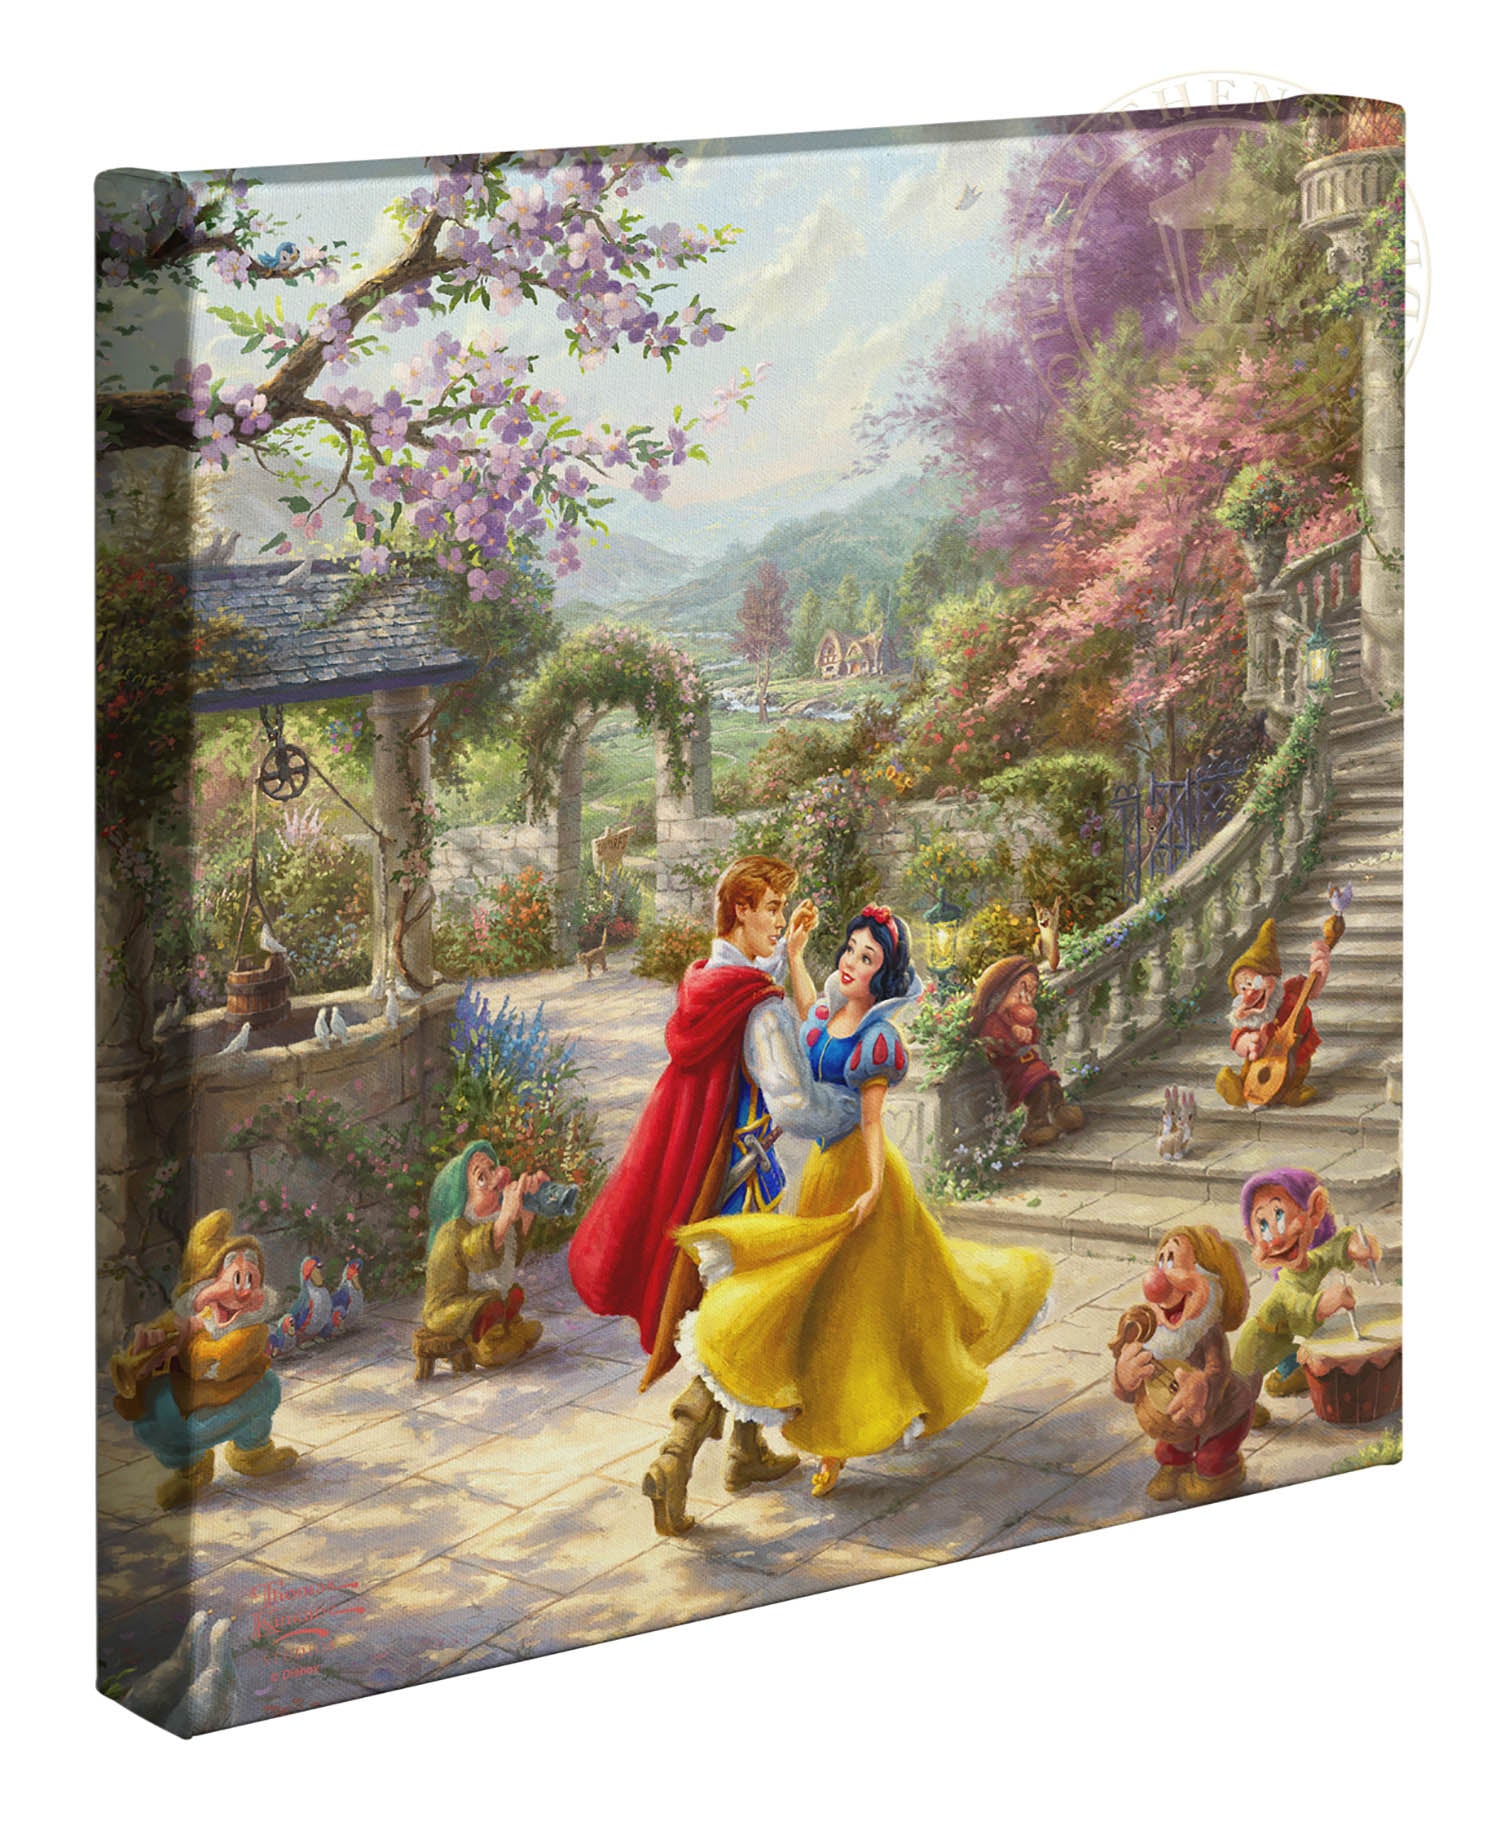 Snow White Dancing in the Courtyard  - 14" x14" Gallery Wrapped Canvas